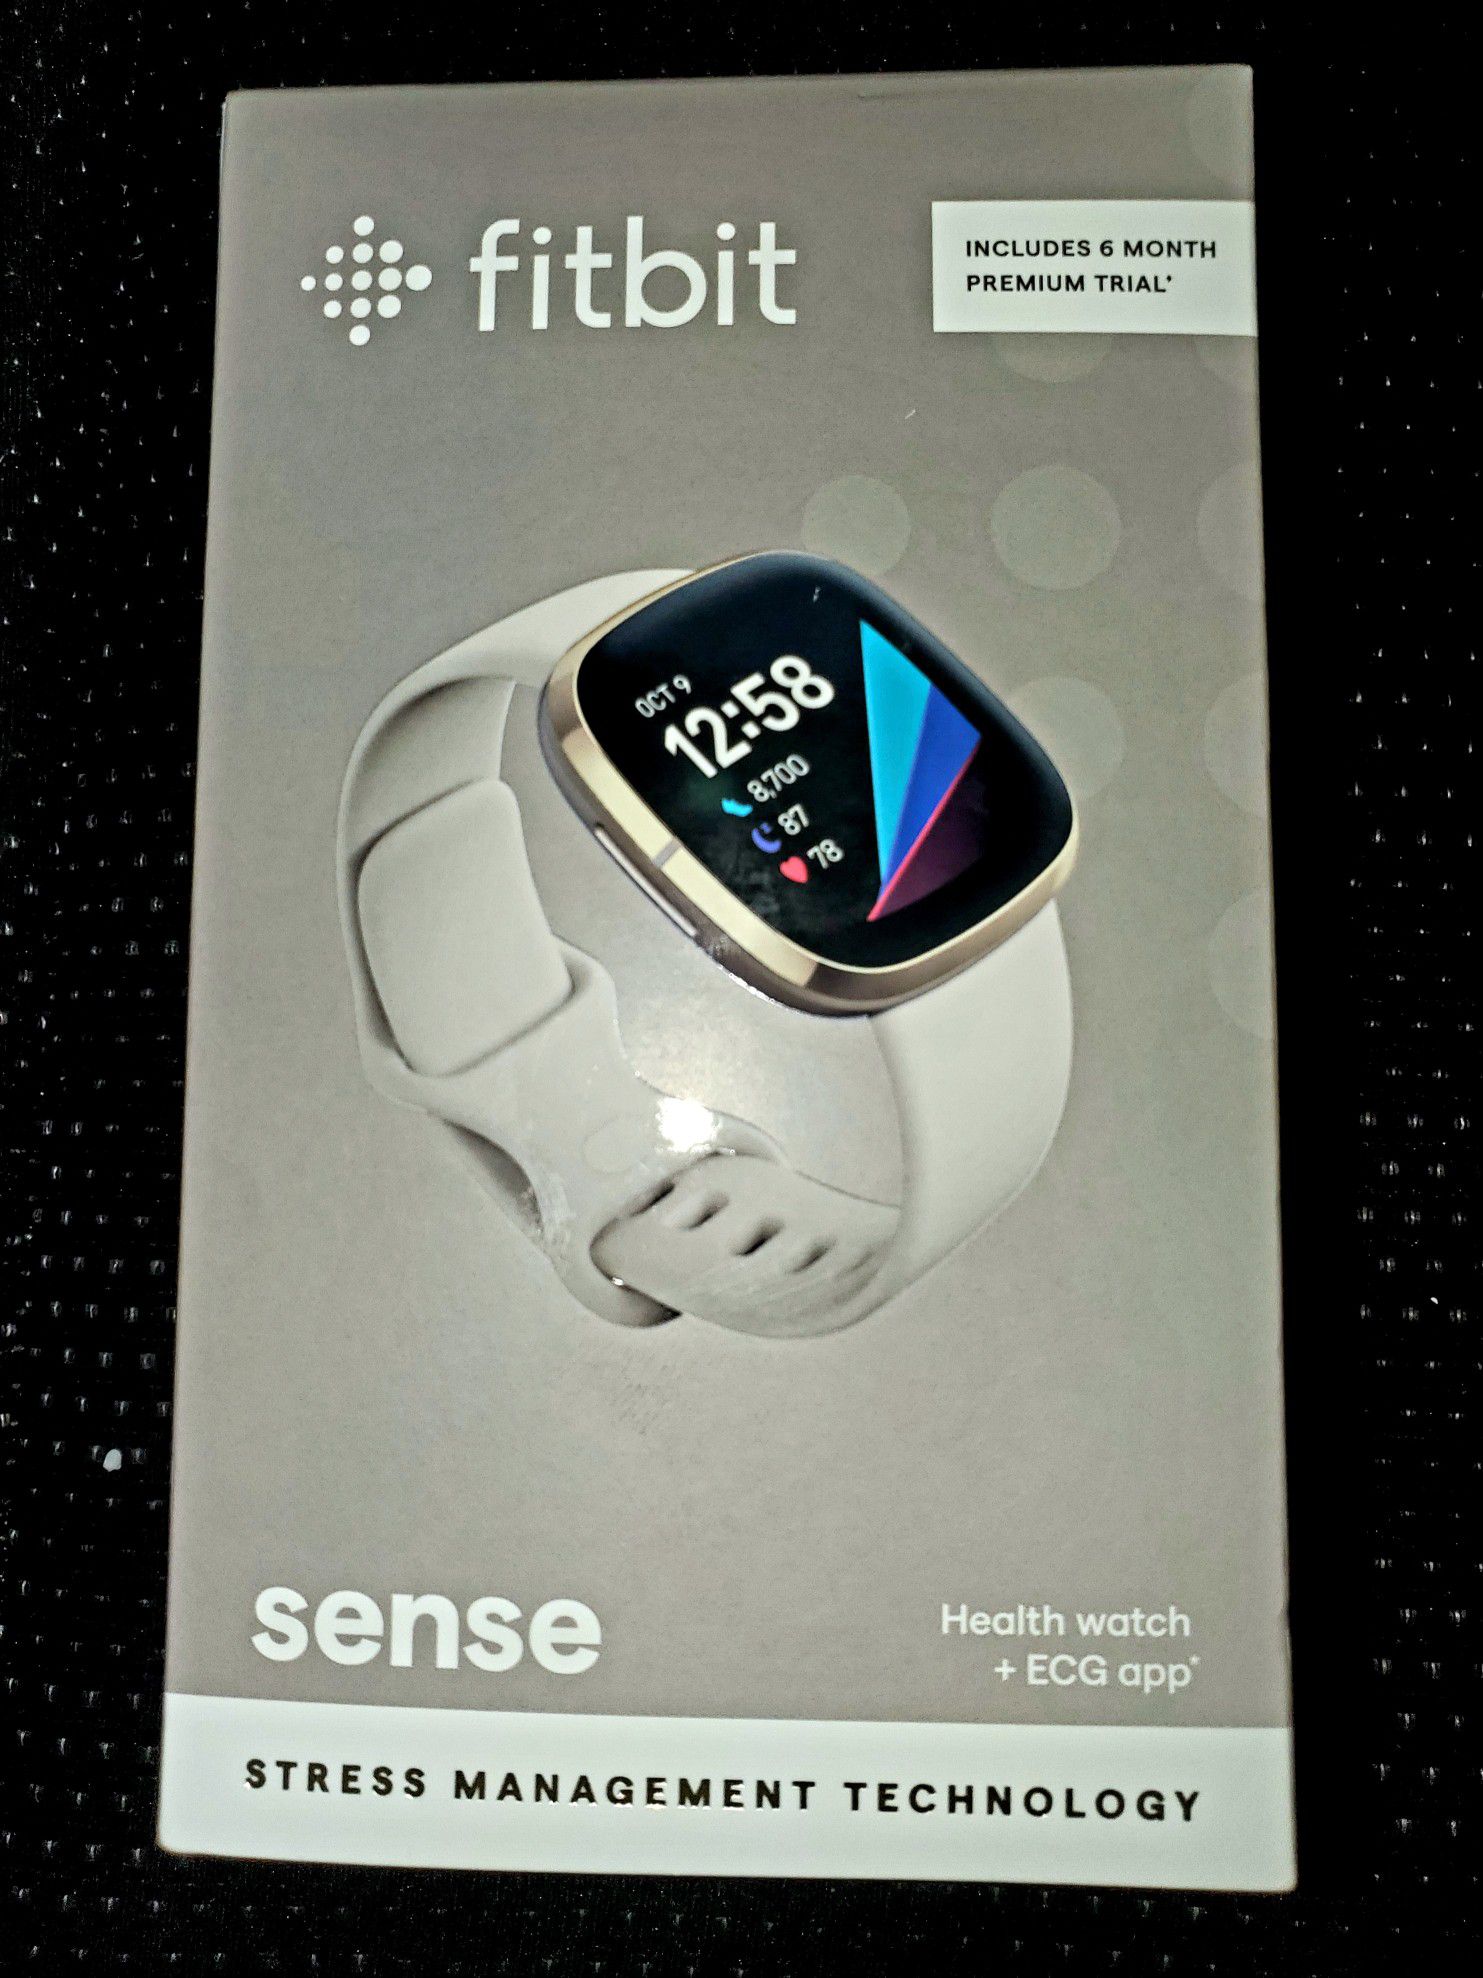 FITBIT SENSE HEALTH WATCH + ECG APP STRESS MANAGEMENT TECHNOLOGY BRAND NEW NEVER OPENED OR USED